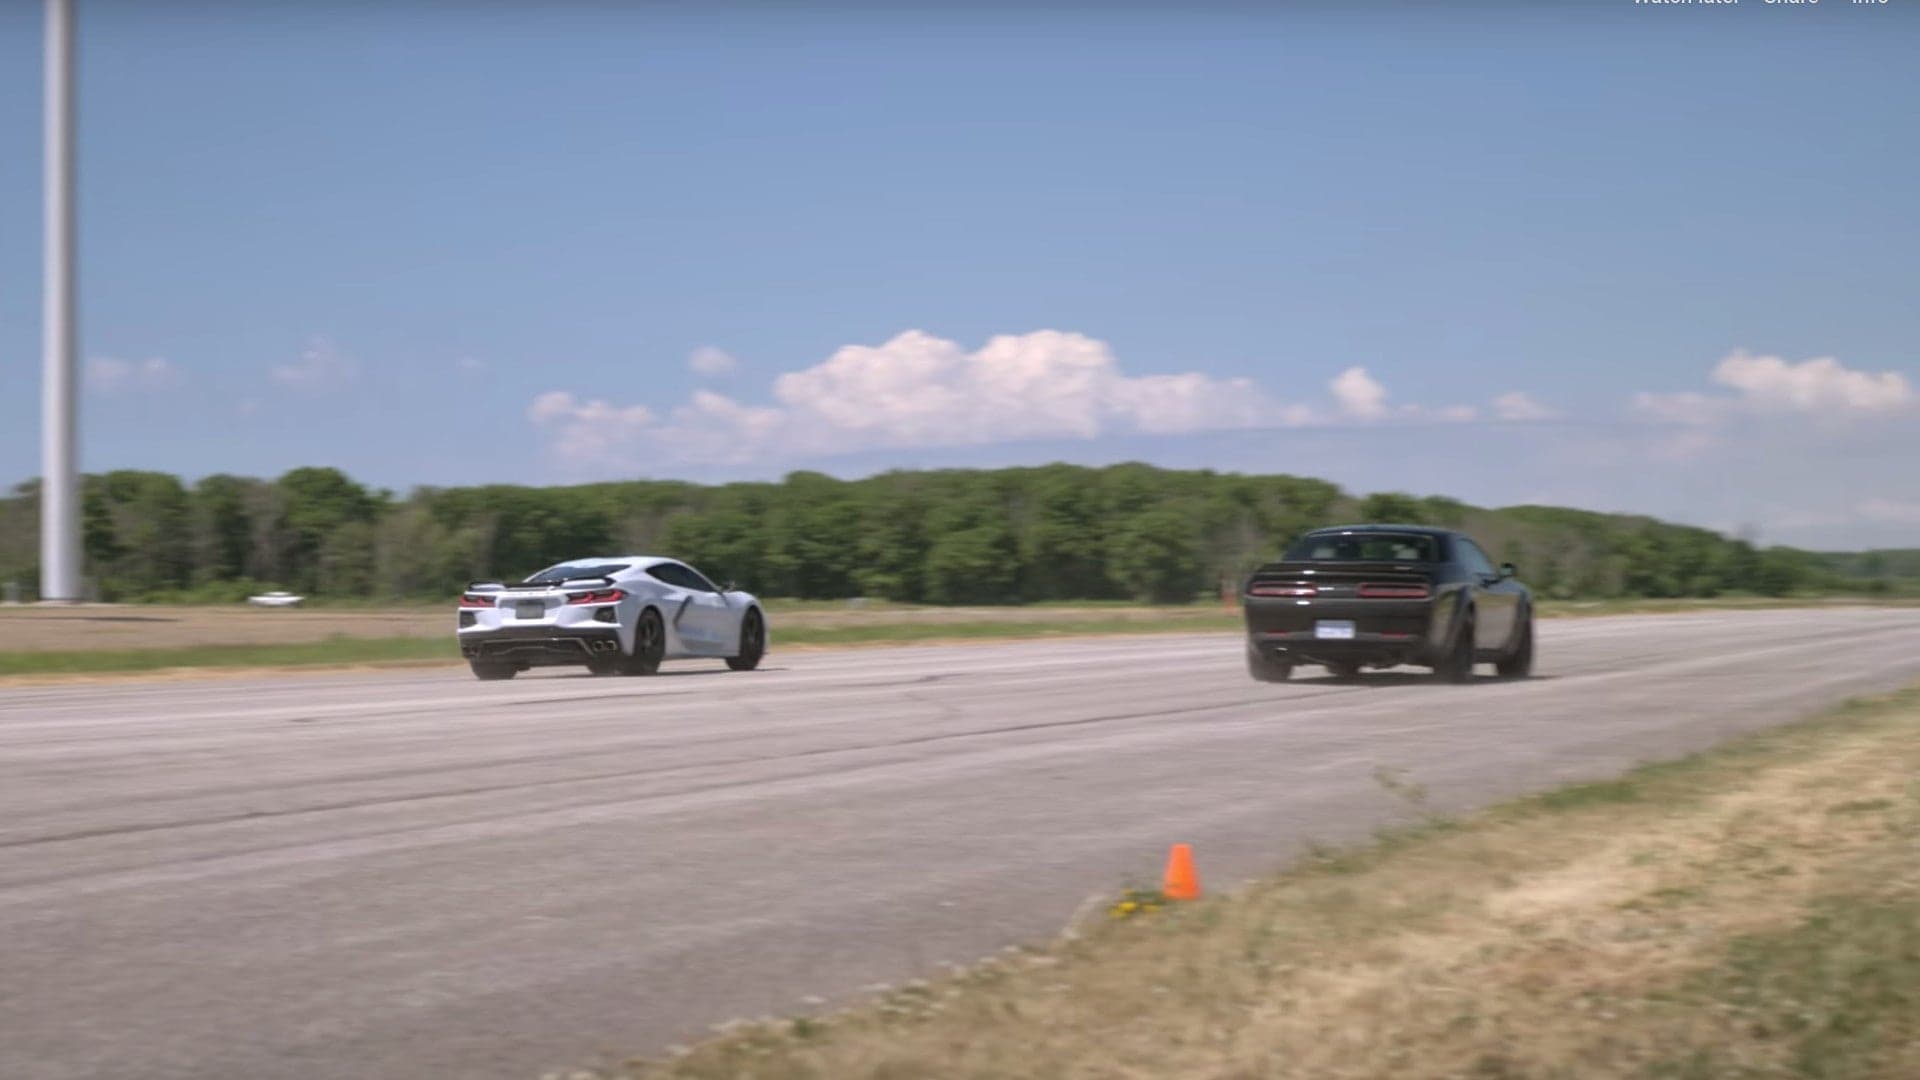 Here’s How a 2020 Chevy Corvette Holds Up Against a Dodge Challenger Demon in the Quarter-Mile